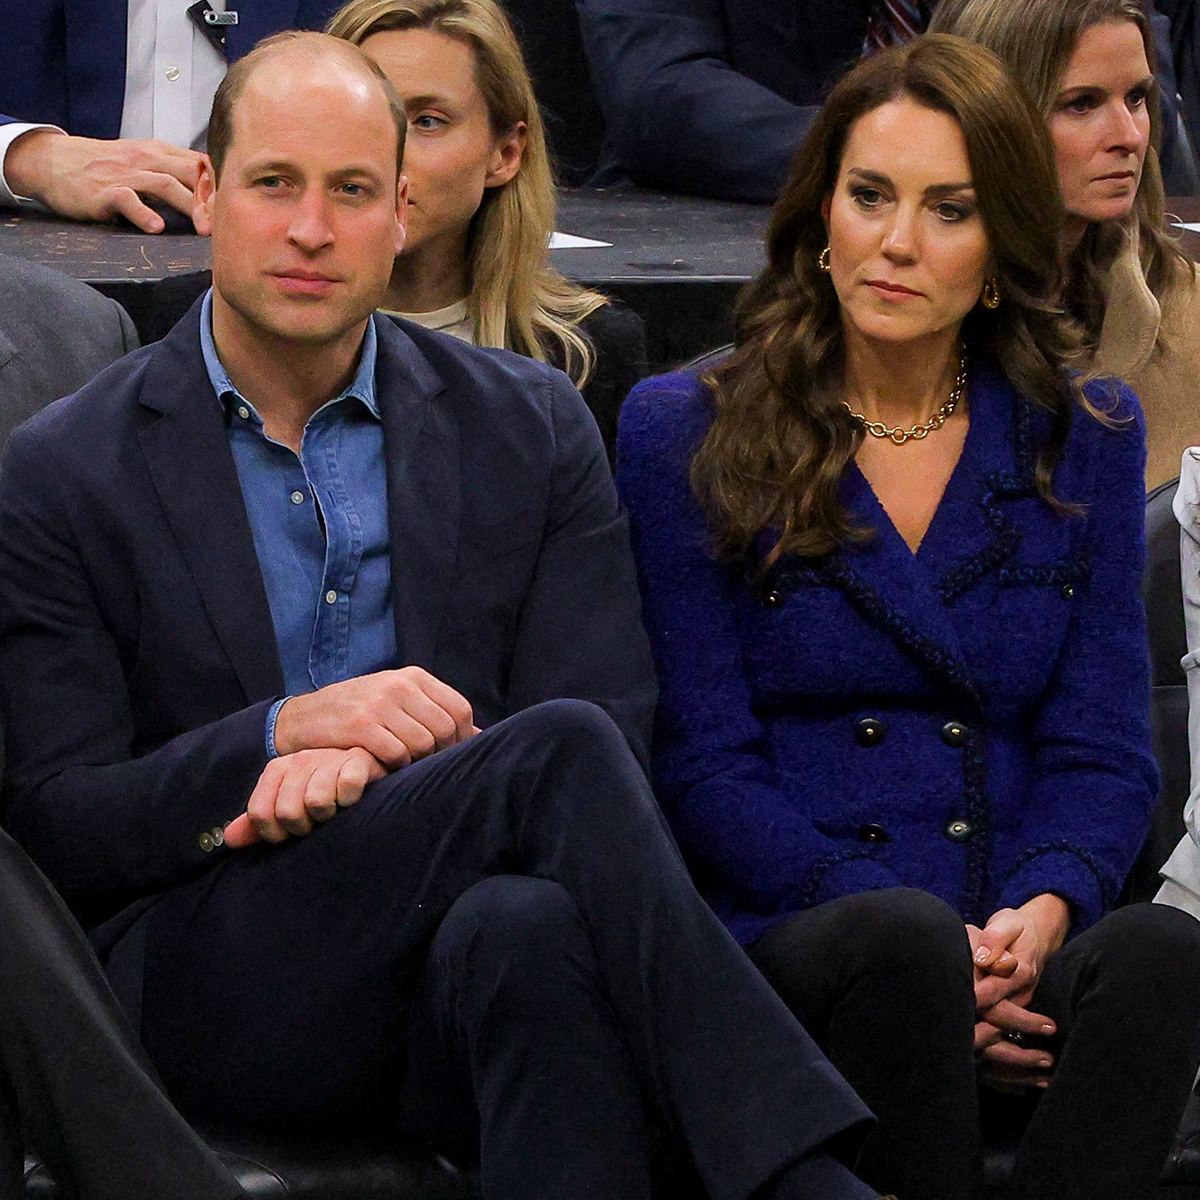 See Prince William and Kate Middleton’s Courtside Appearance at Celtics Game – E! Online